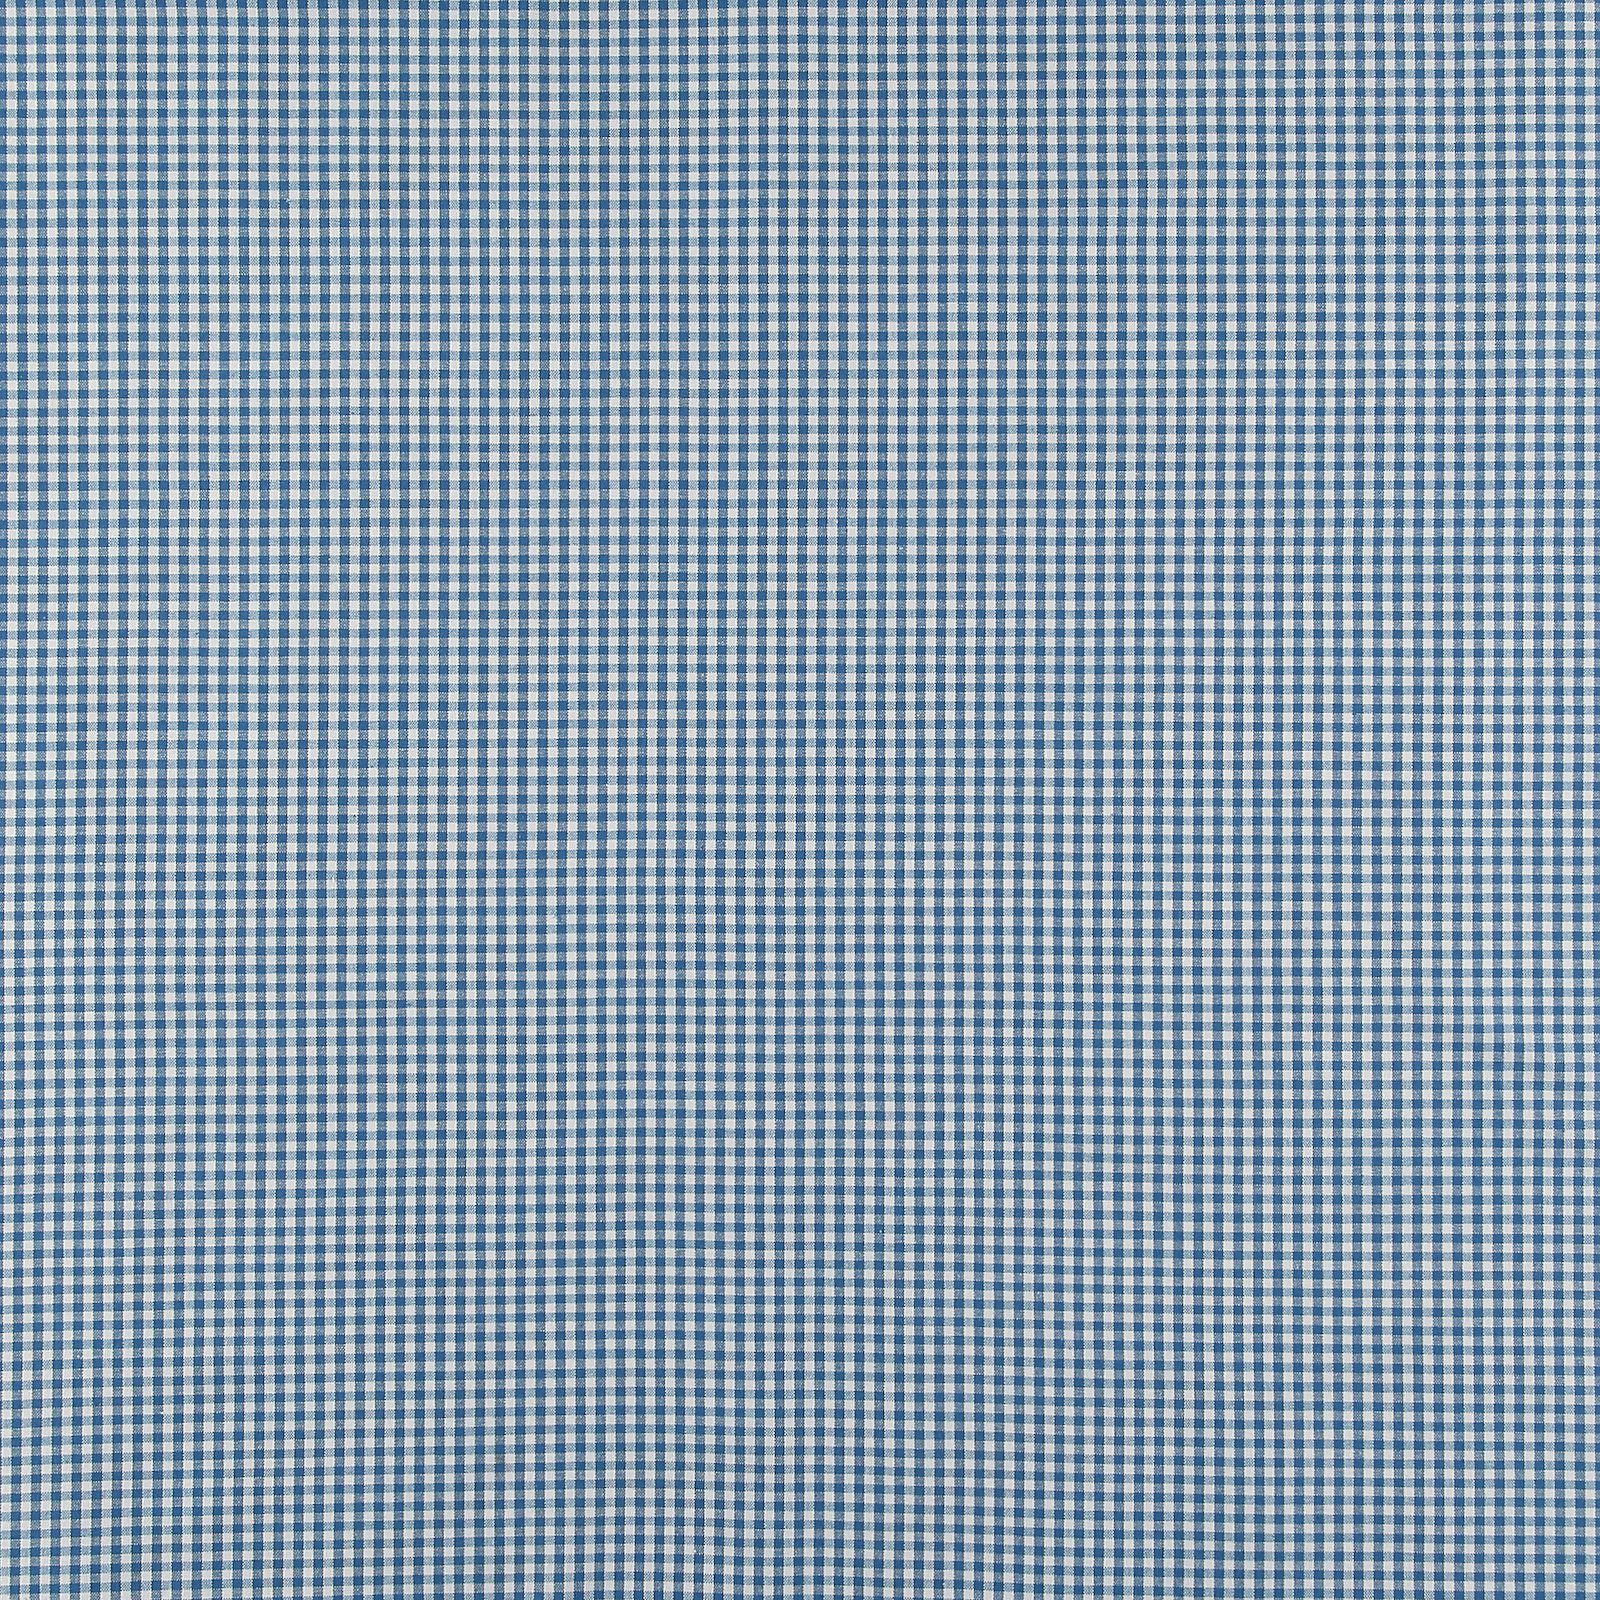 Cotton yarn dyed blue/white small check 816294_pack_sp